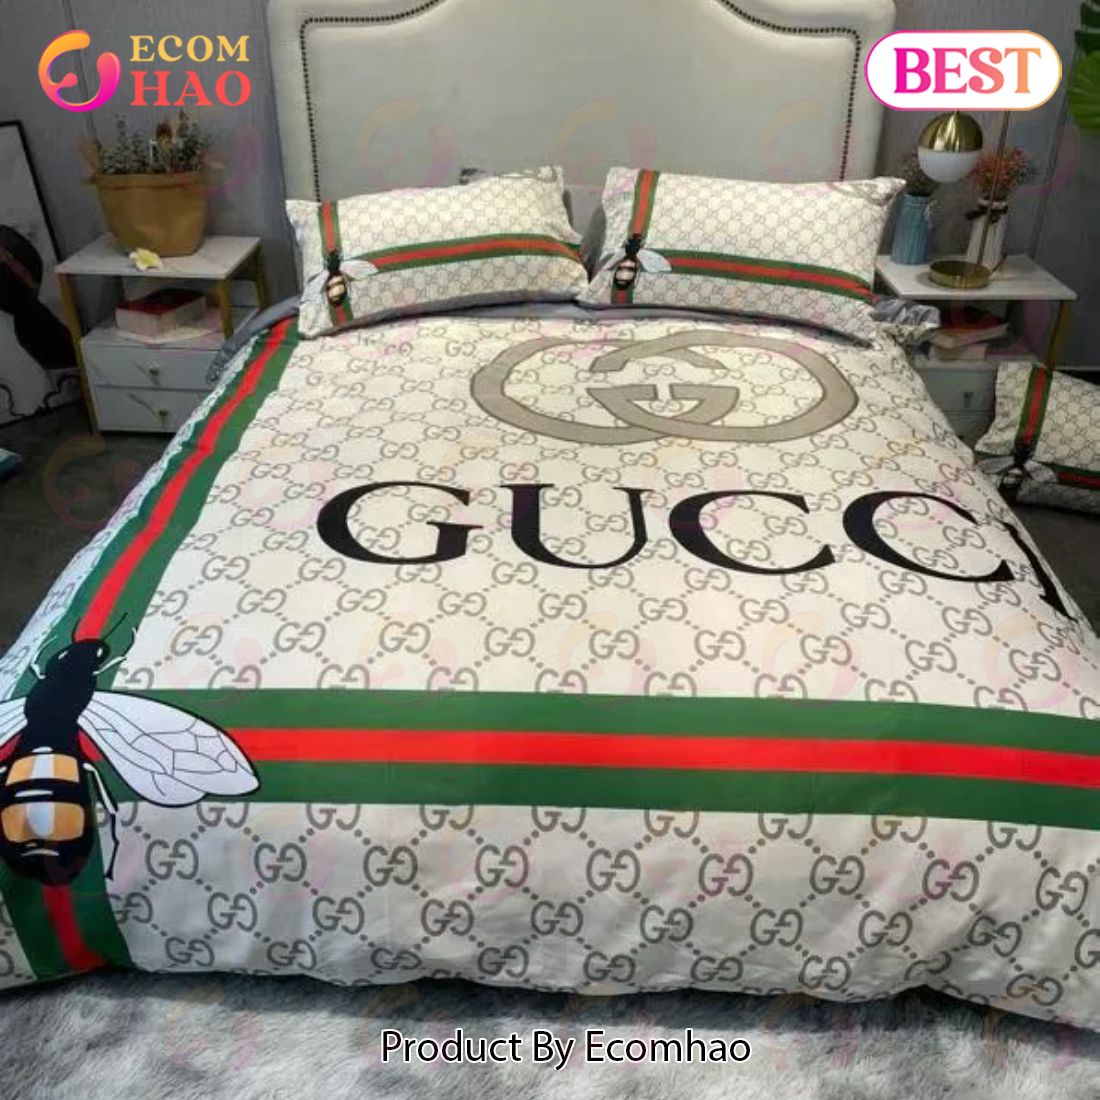 Gucci Bee Luxury Brand Bedding Sets Bedspread Duvet Cover Set Bedroom Decor  Thanksgiving Decorations For Home Best Luxury Bed Sets - Ecomhao Store